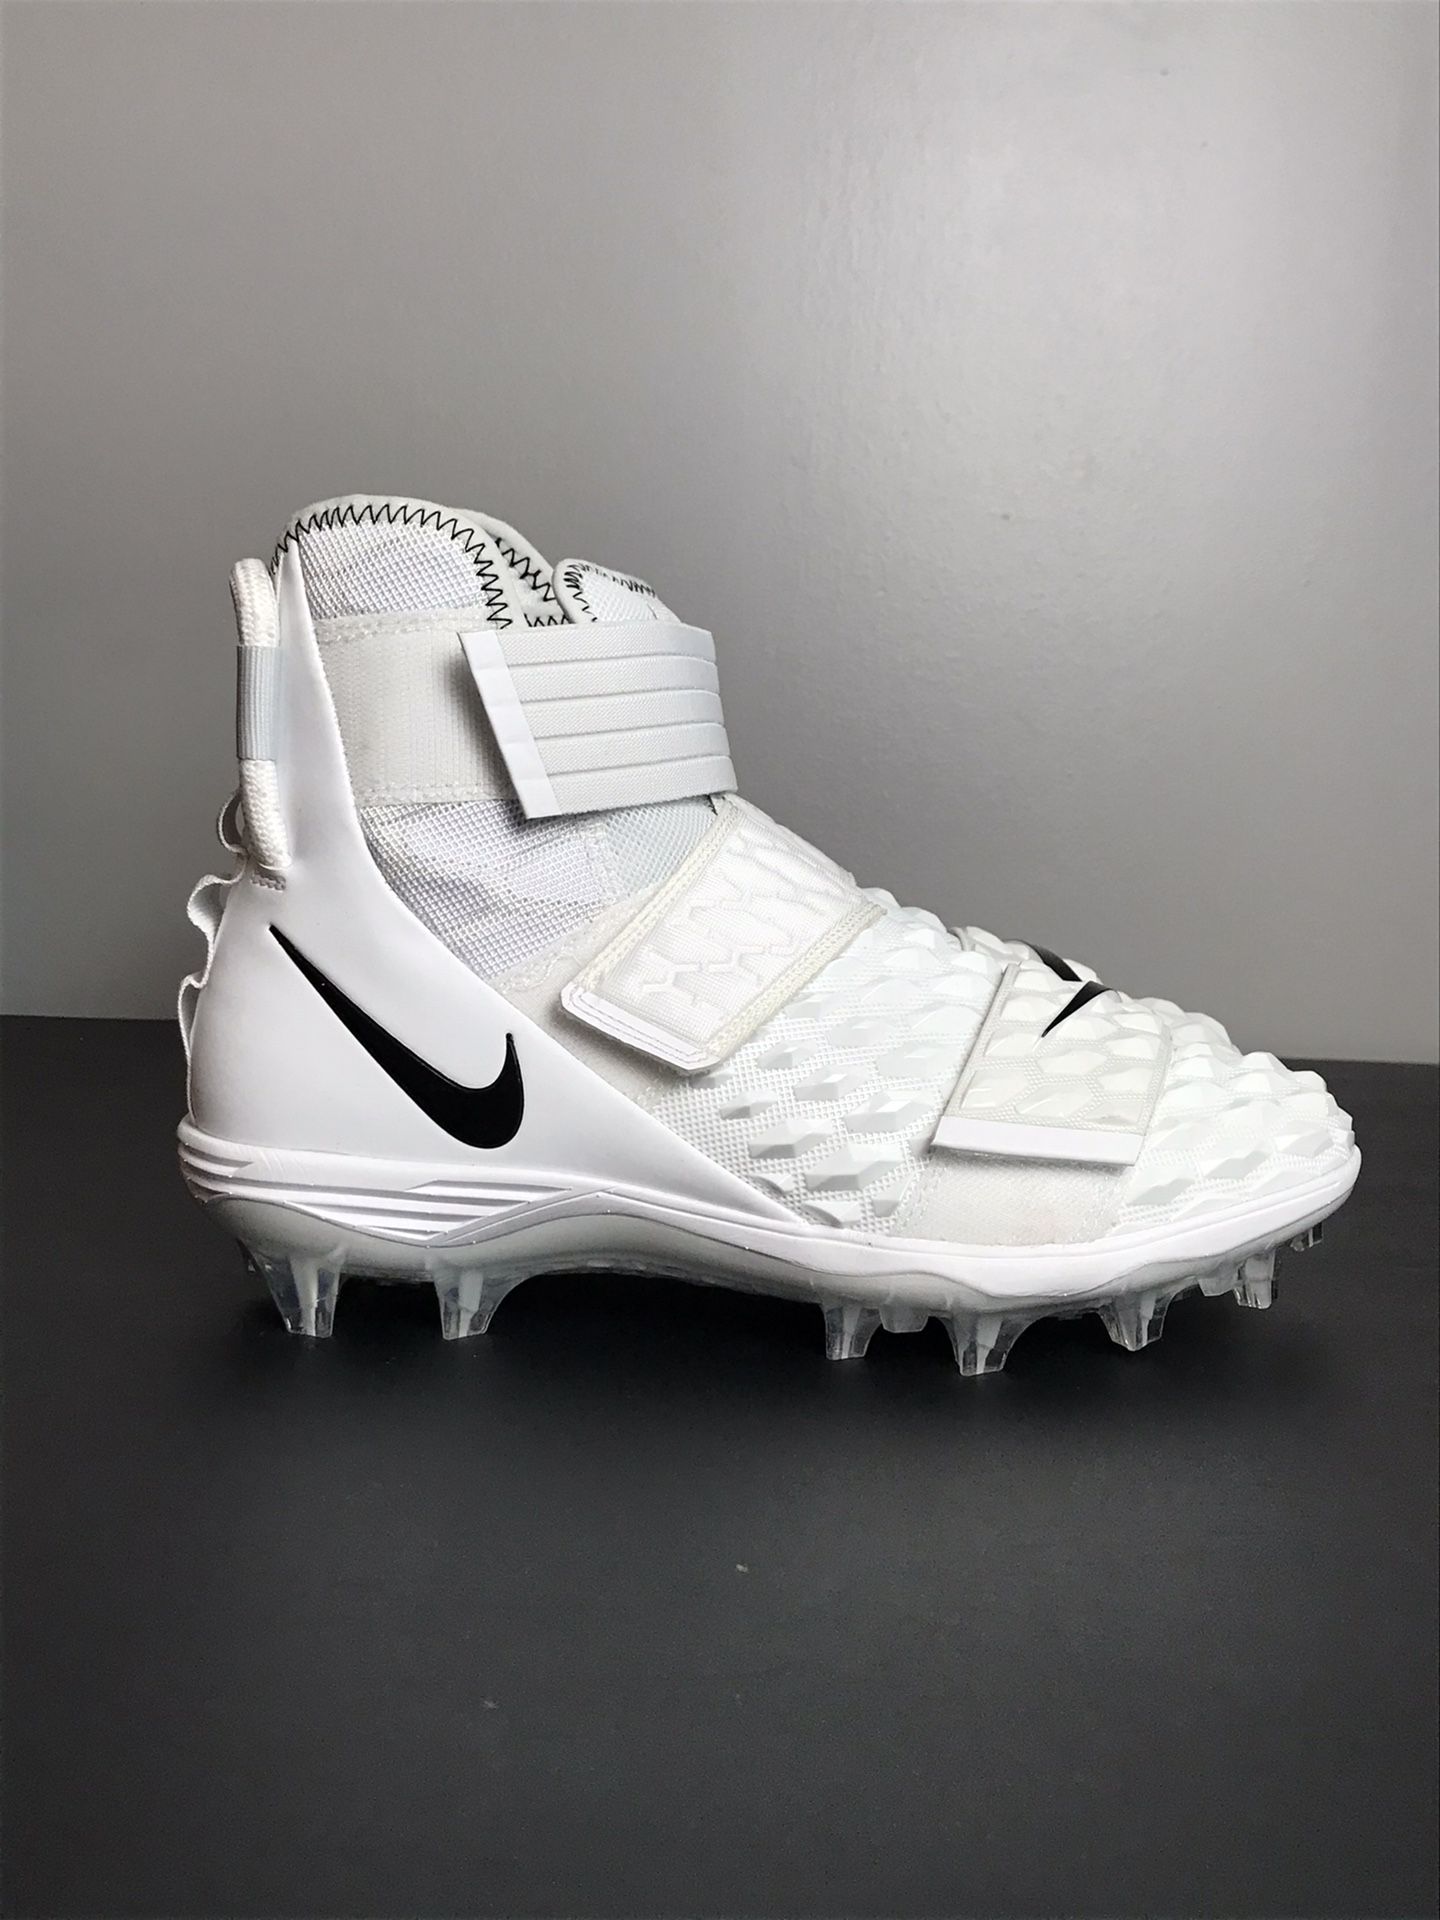 Nike Force Savage Elite 2 "White Wolf" Football Cleats AH3999-100 Men’s SIZE 9 New without box